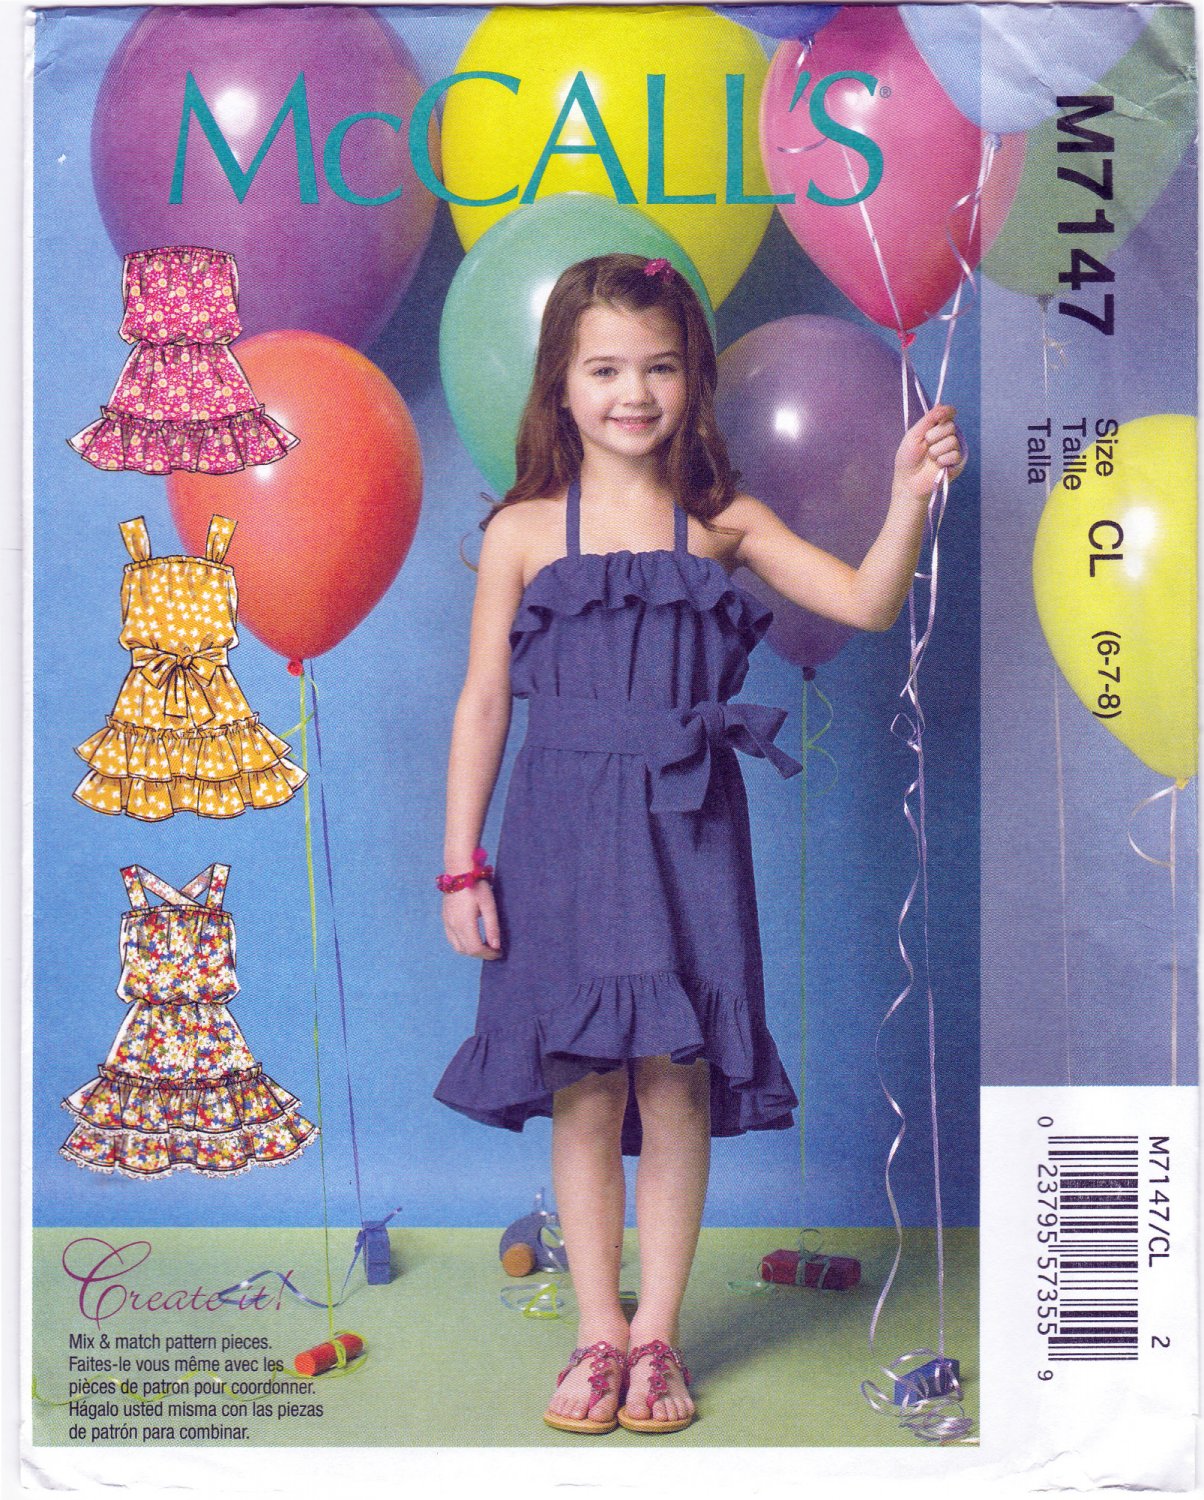 McCall's 7147 M7147 Girls Dresses Belts Childrens Sewing Pattern Kids Sizes 6-7-8 Mix - Match Pieces